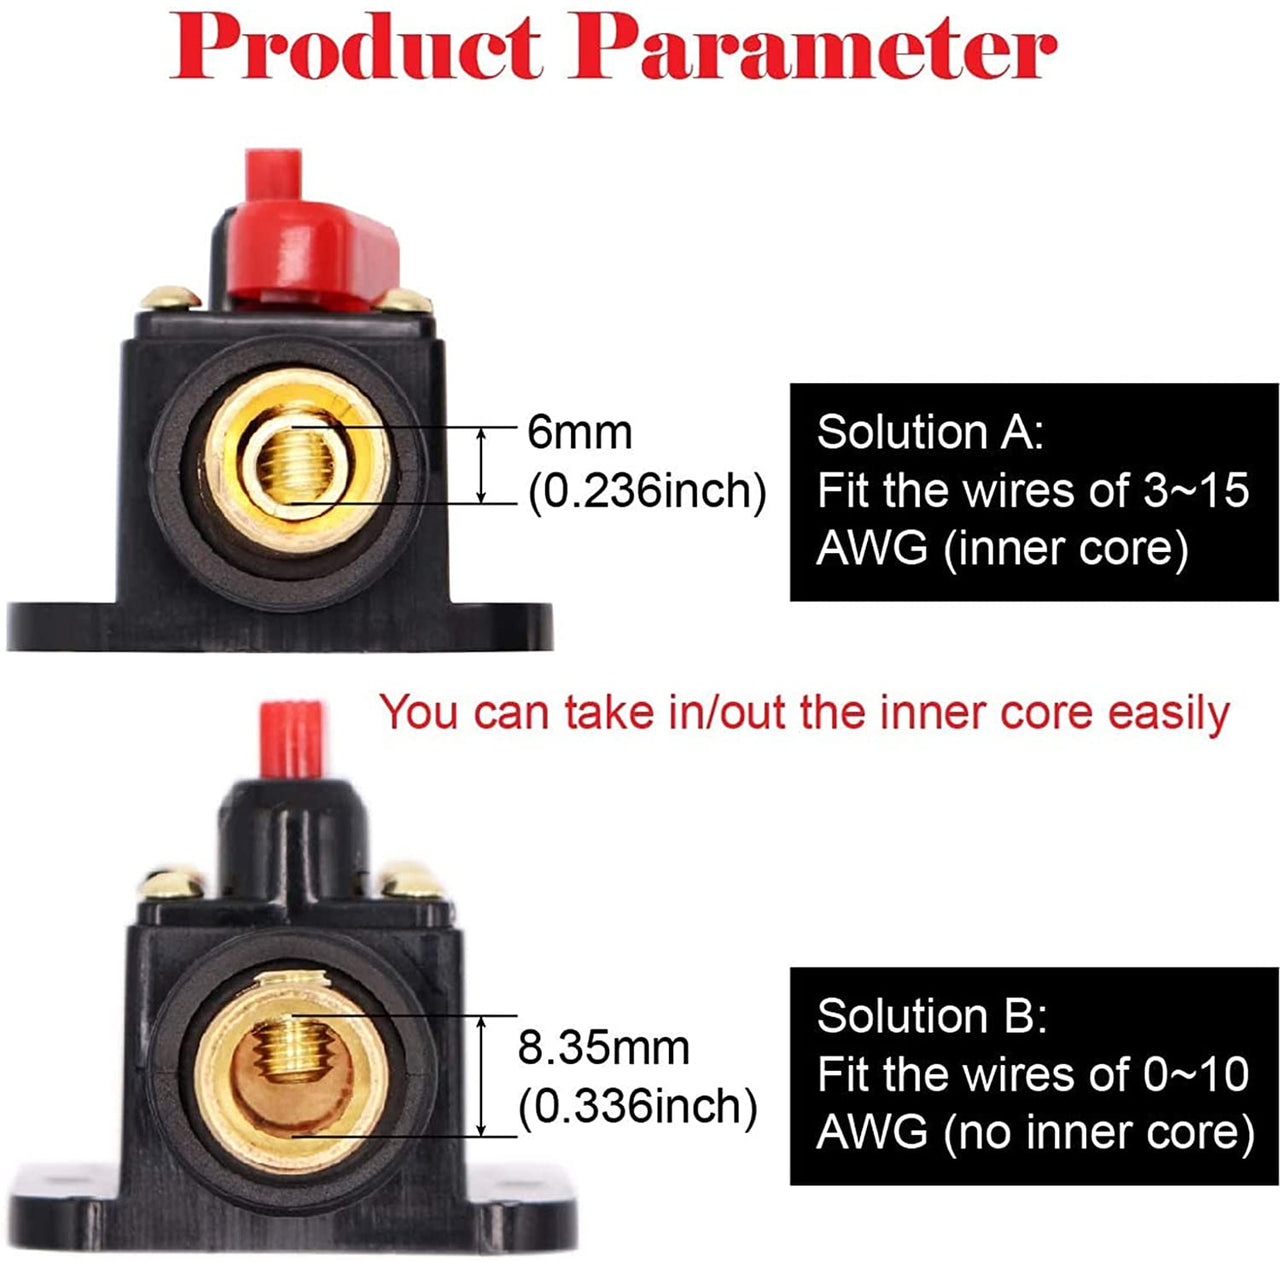 Absolute ICB80 4/8 AWG 80 Amp in-line Circuit Breaker with Manual Reset with Manual Reset Car Auto Marine Boat Stereo